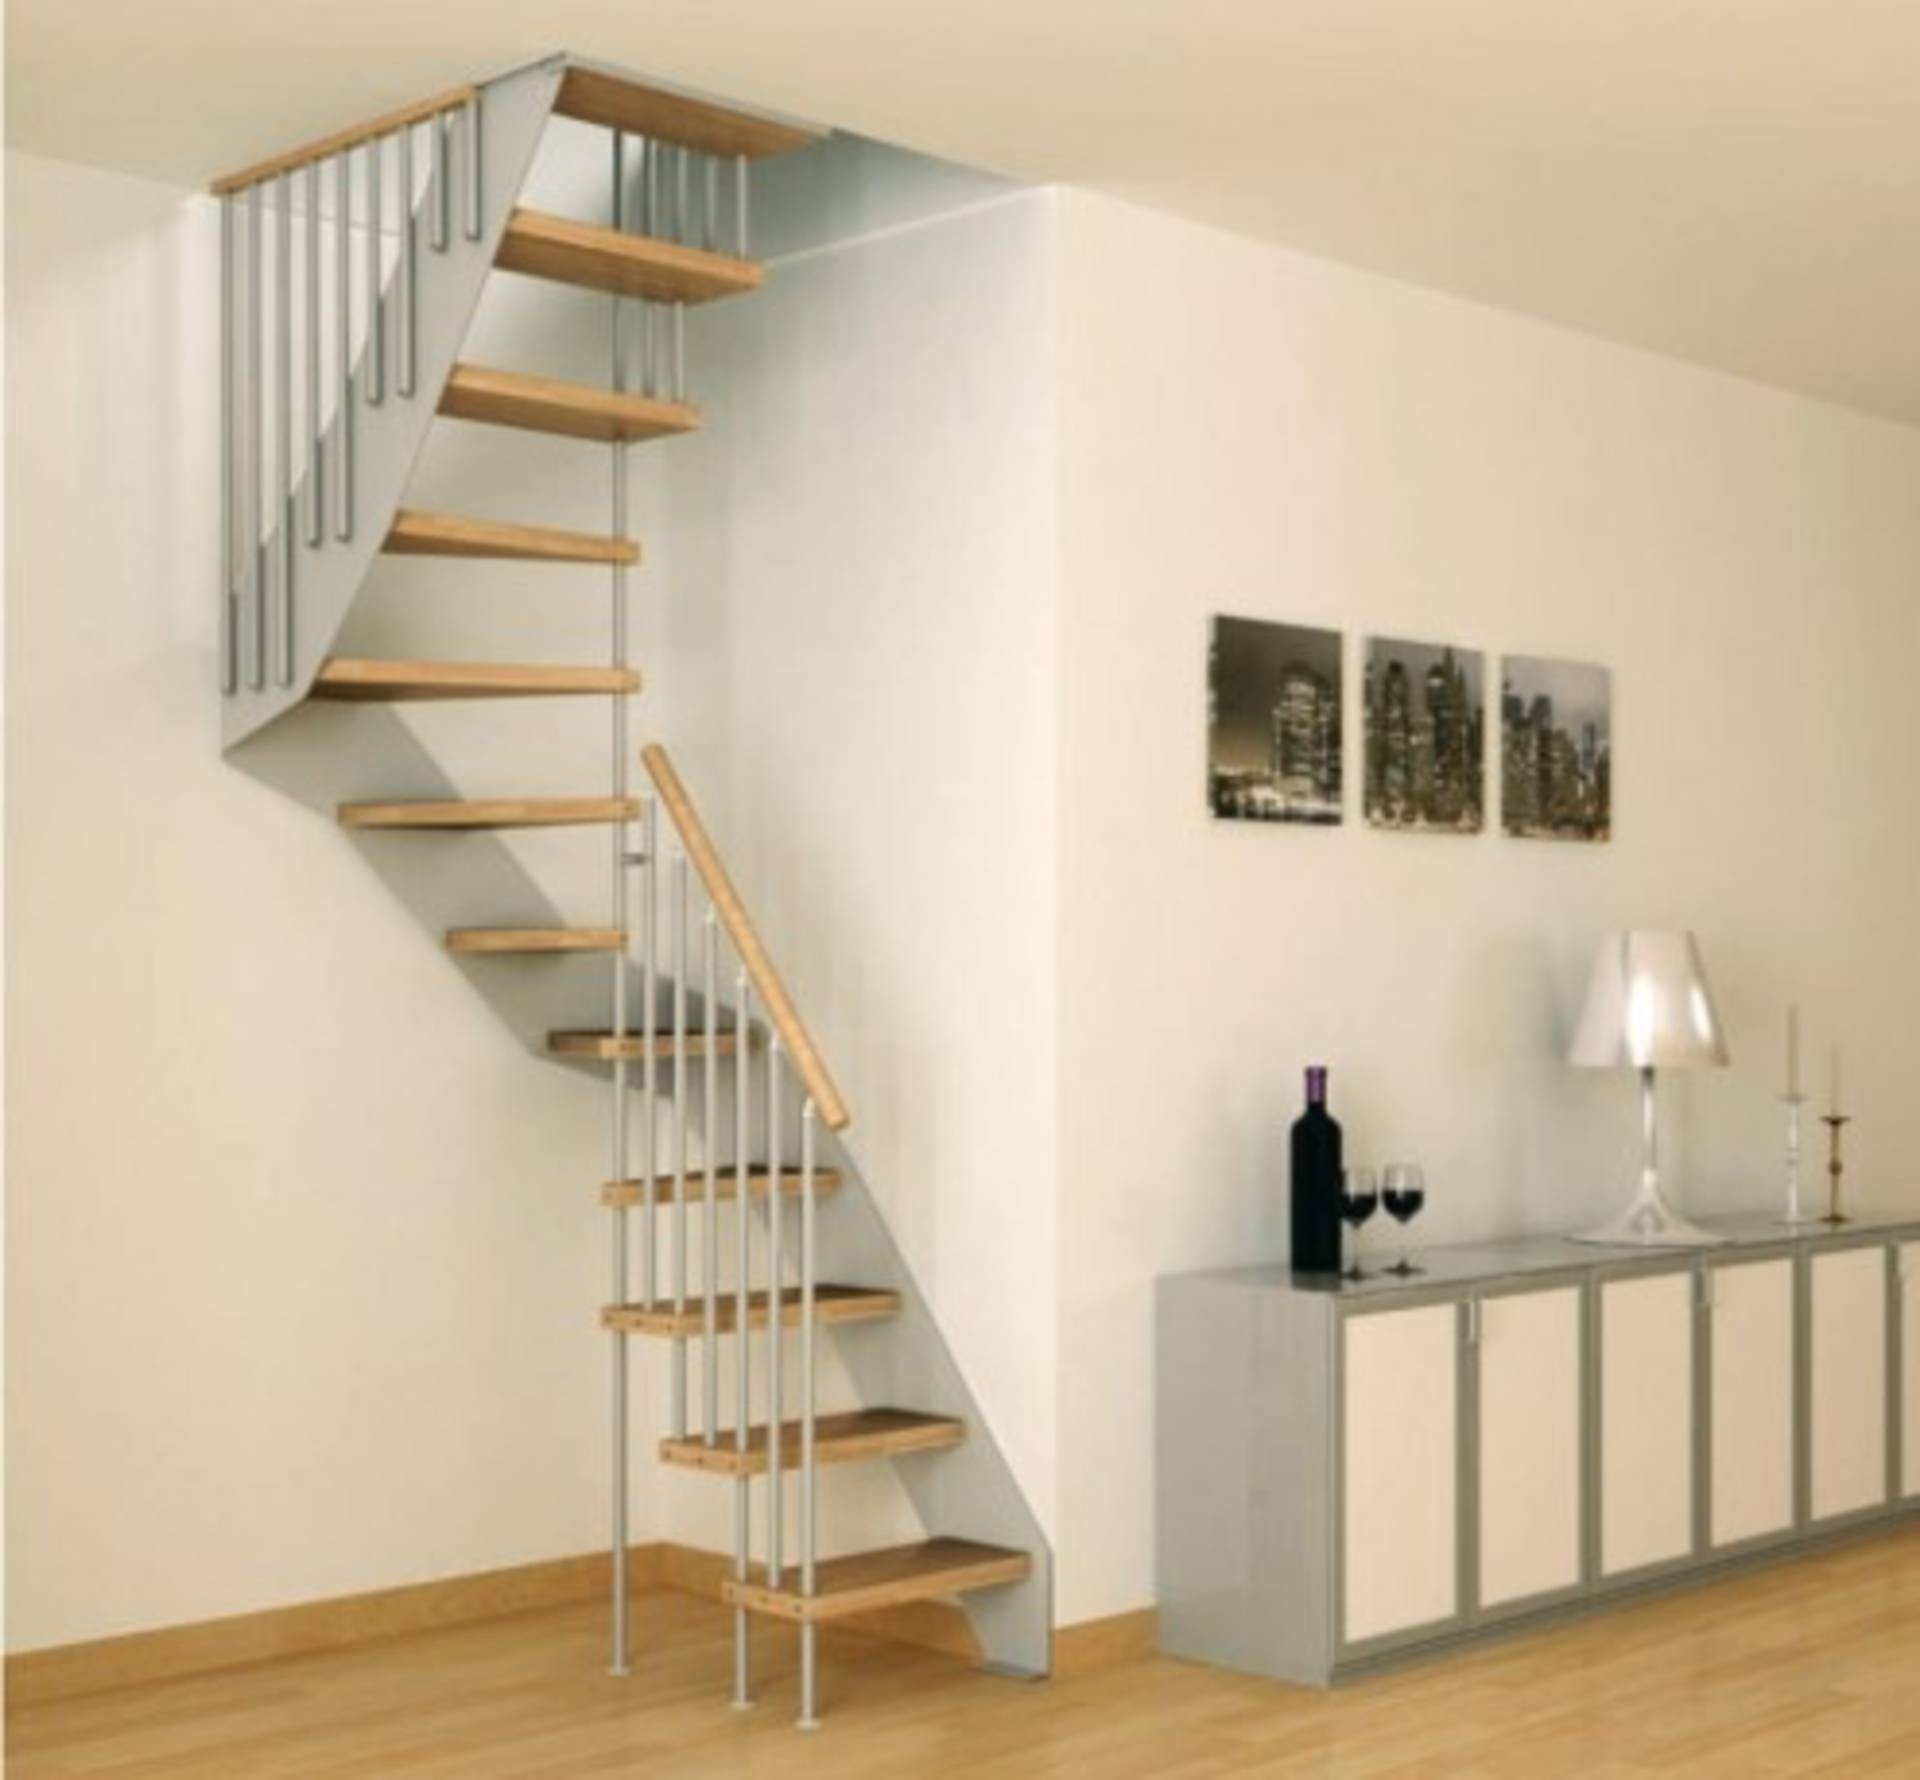 Small staircases for lofts